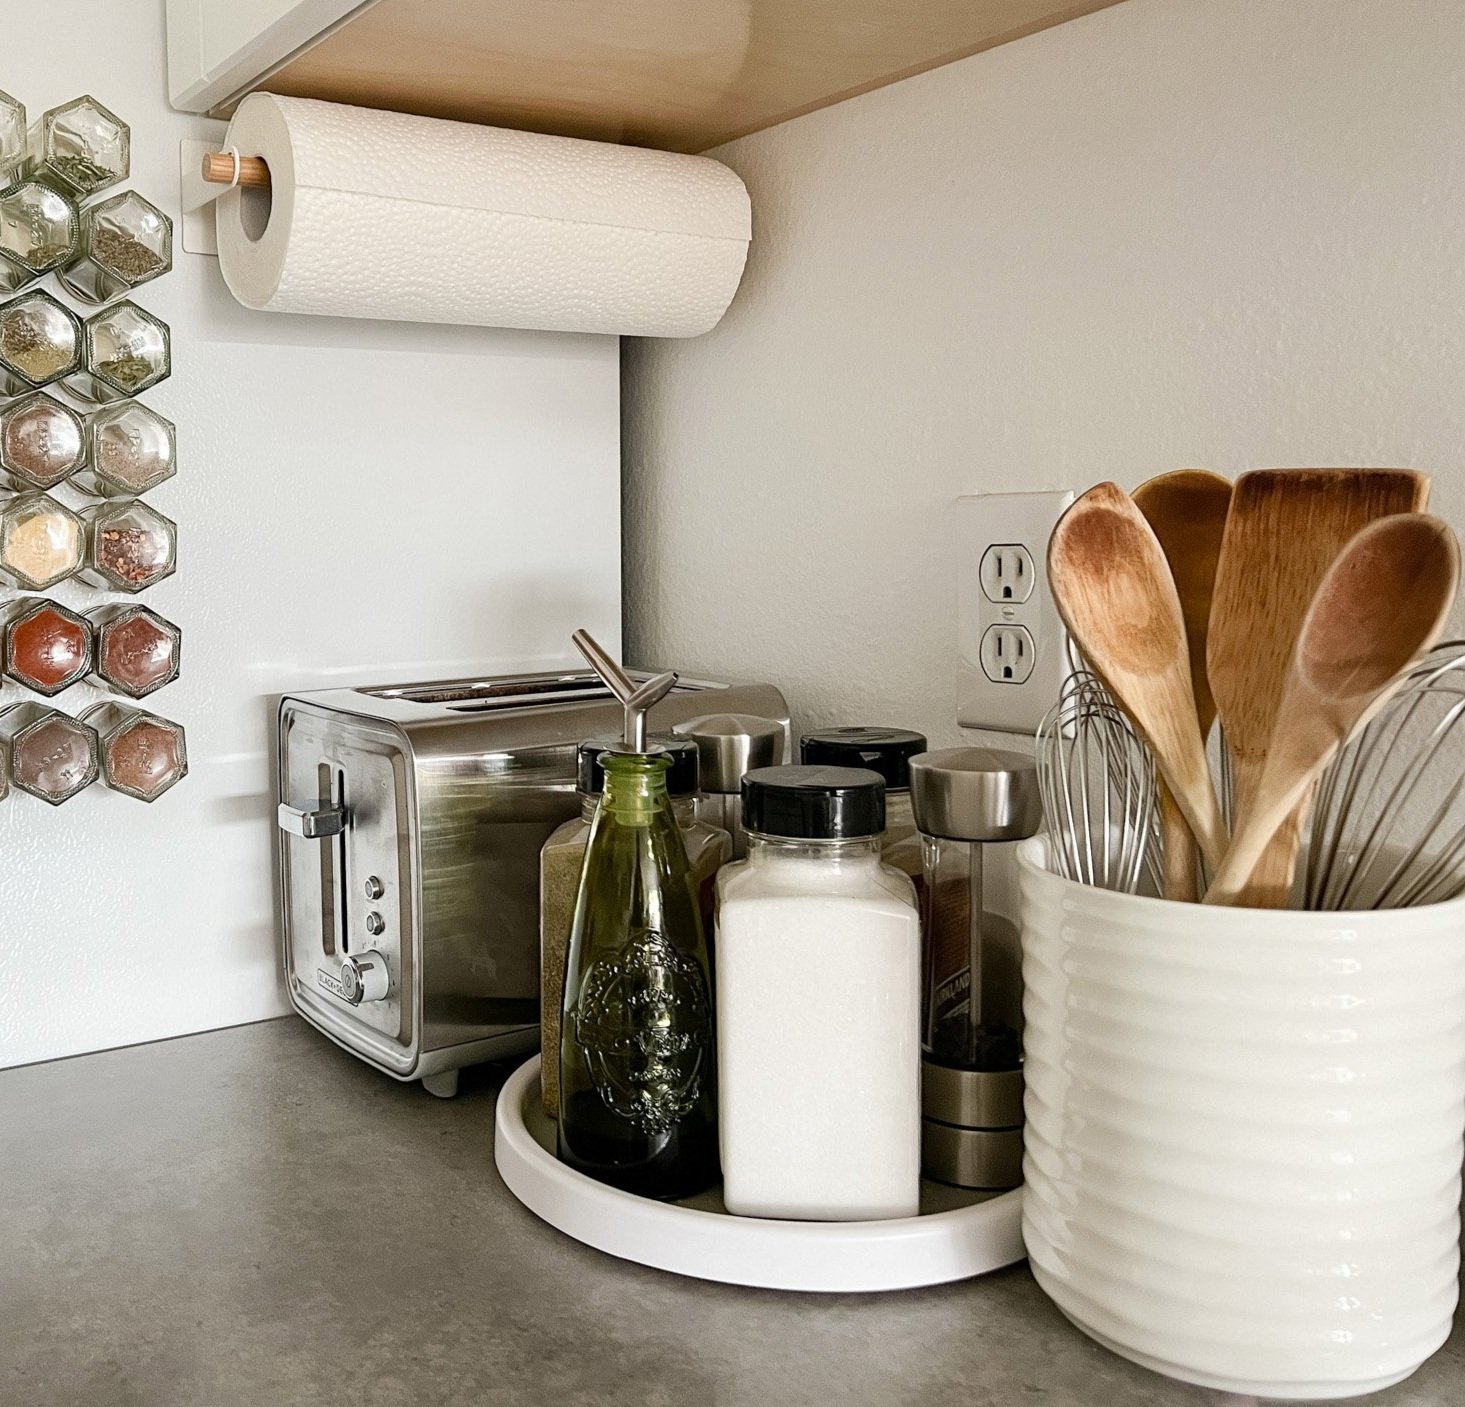 Save Kitchen Countertop Space With These Command Strip Paper Towel Hacks